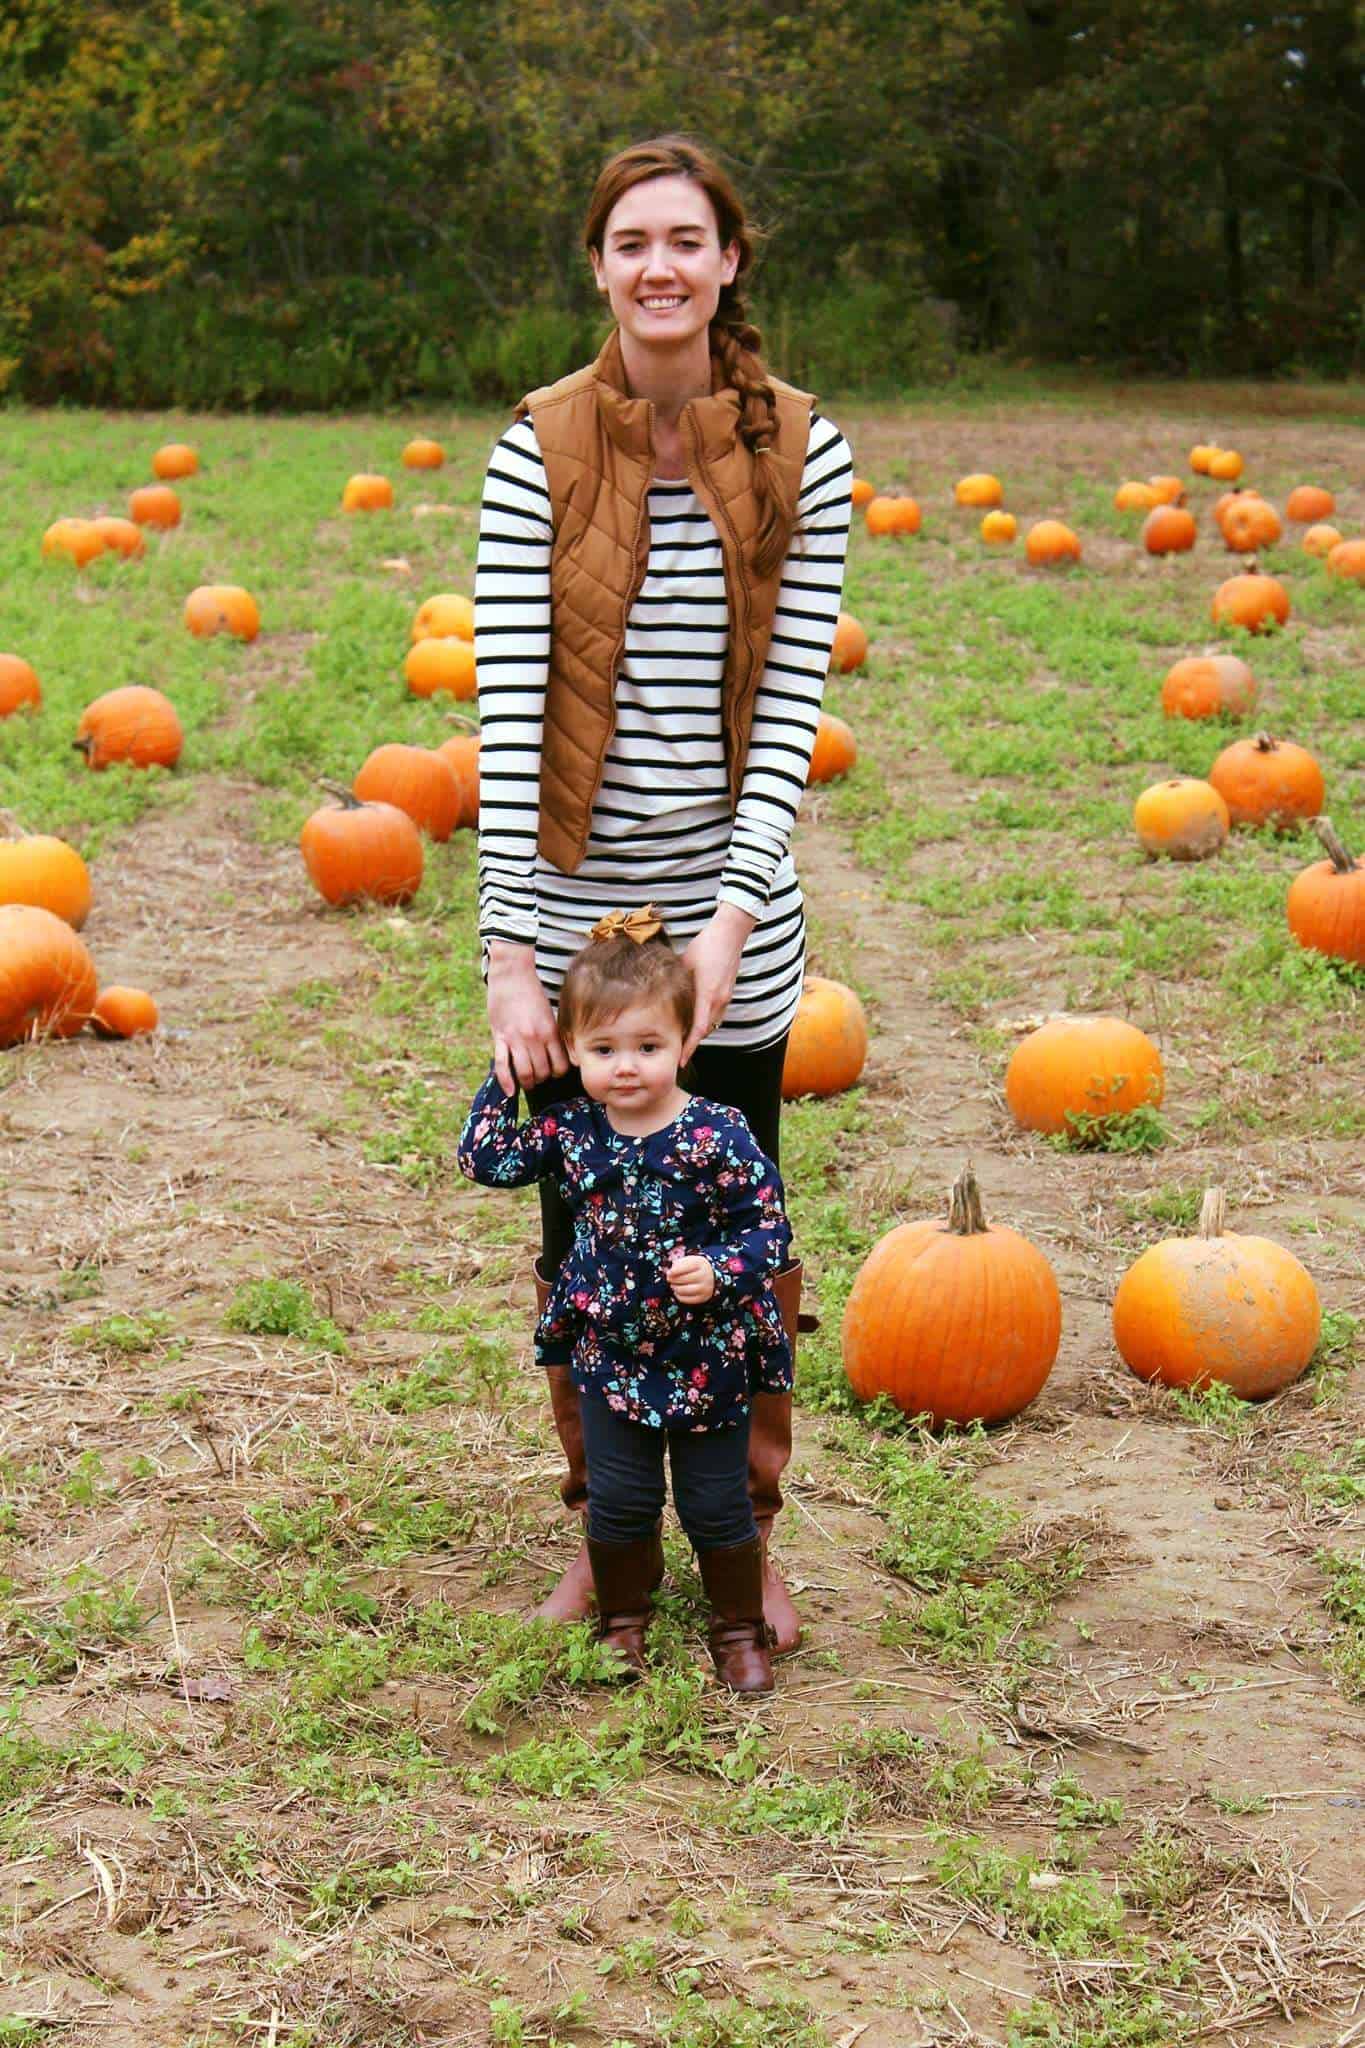 Mom and daughter pose in pumpkin patch.